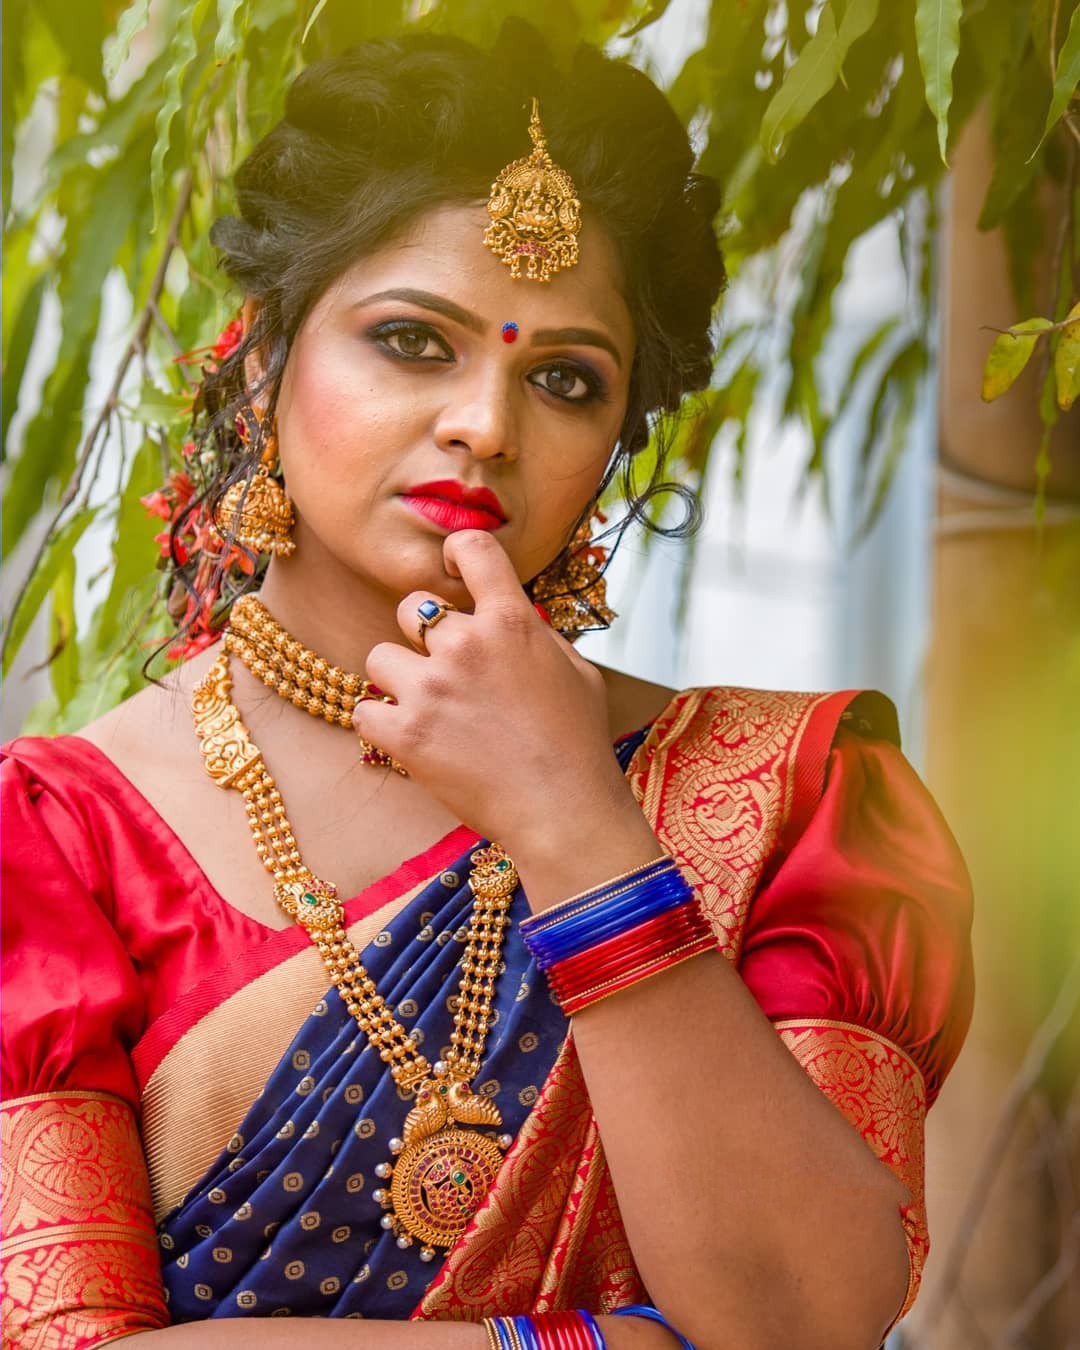 How To Wear A Saree in Bengali Style Easily | Styles At Life